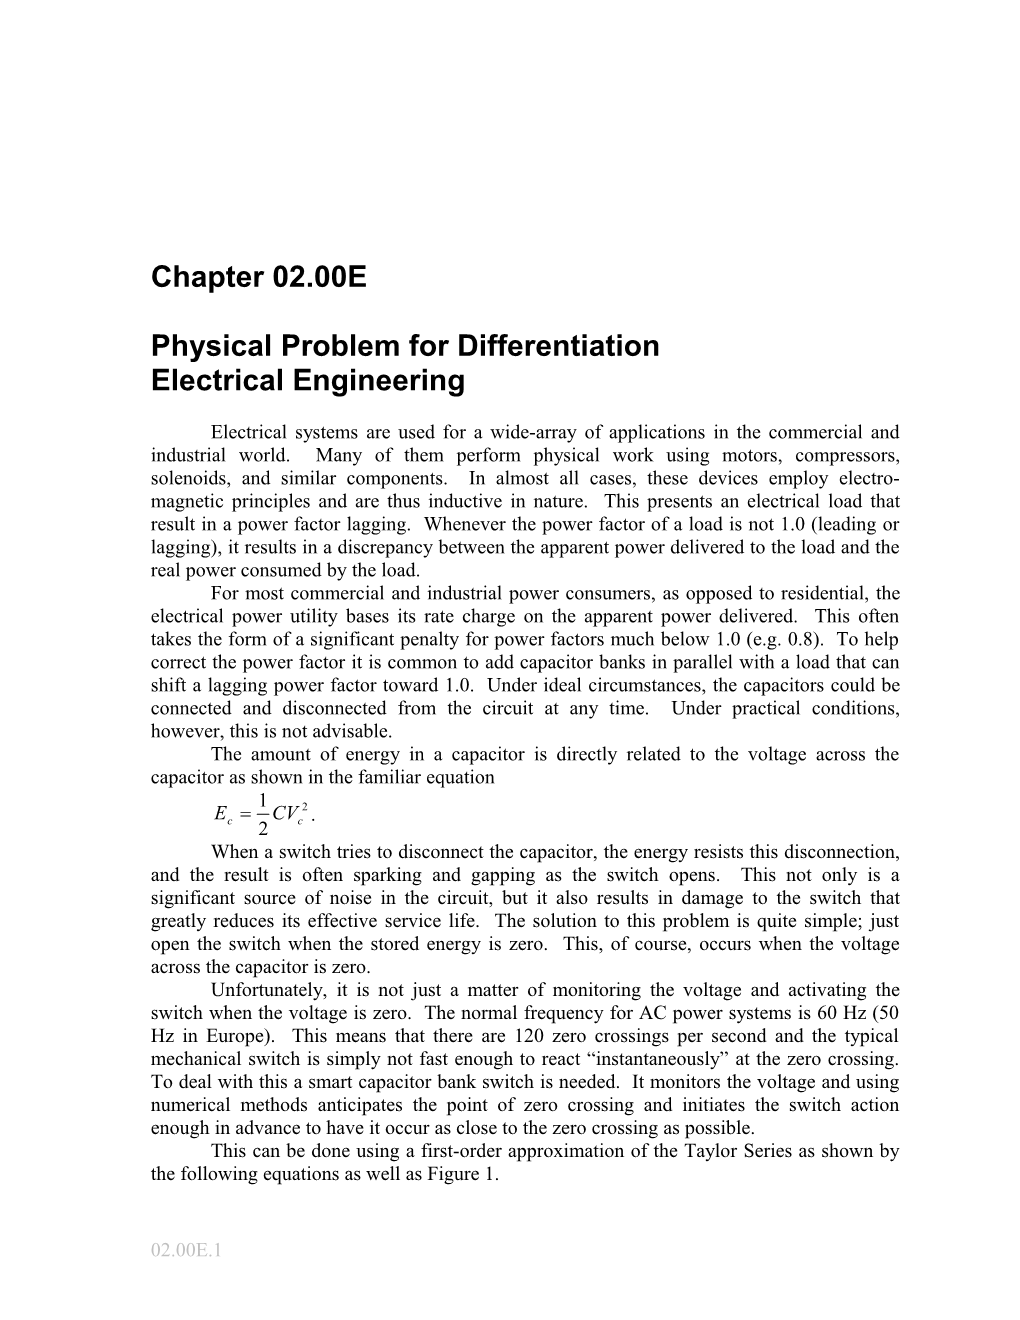 Physical Problems for Differentiation: Electrical Engineering